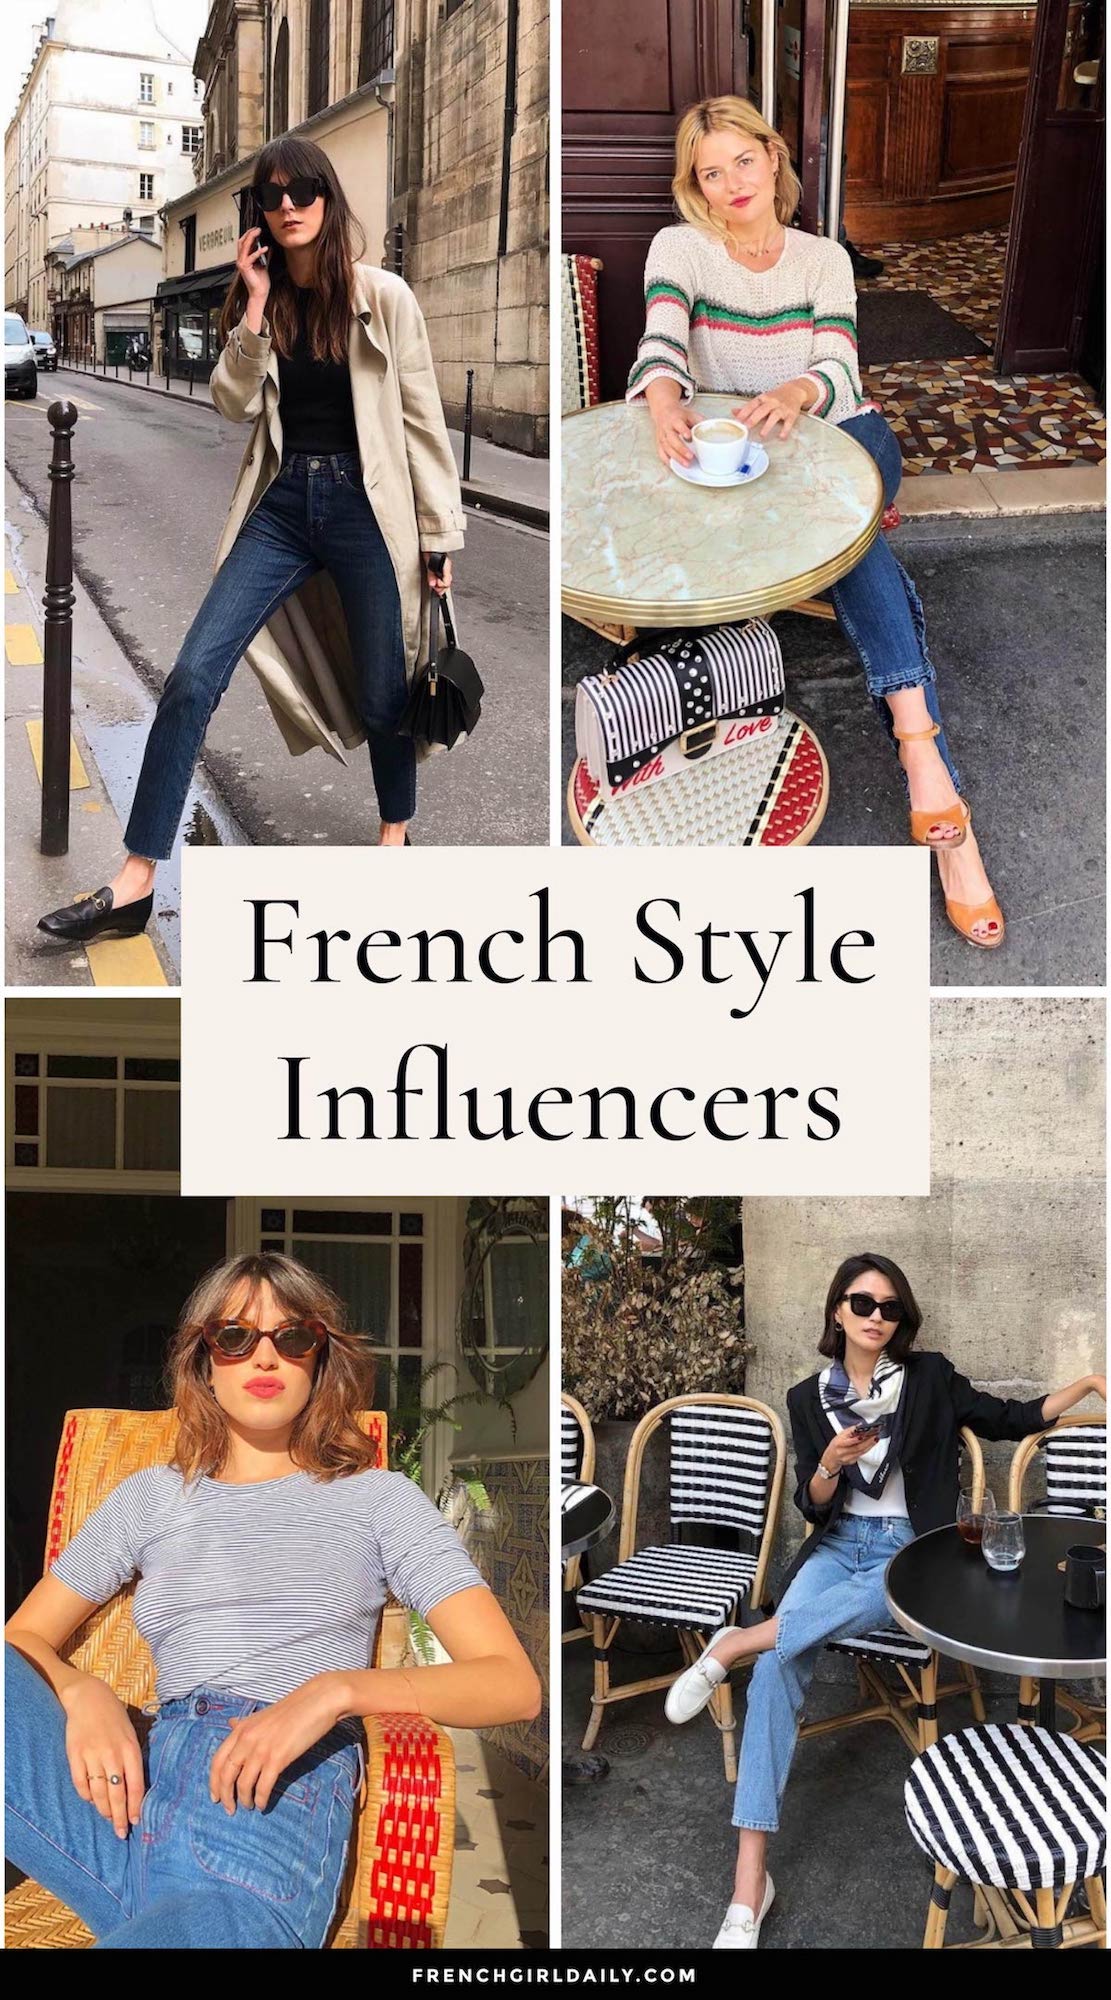 15 French Style Influencers Who Nail The Effortless Parisian Look